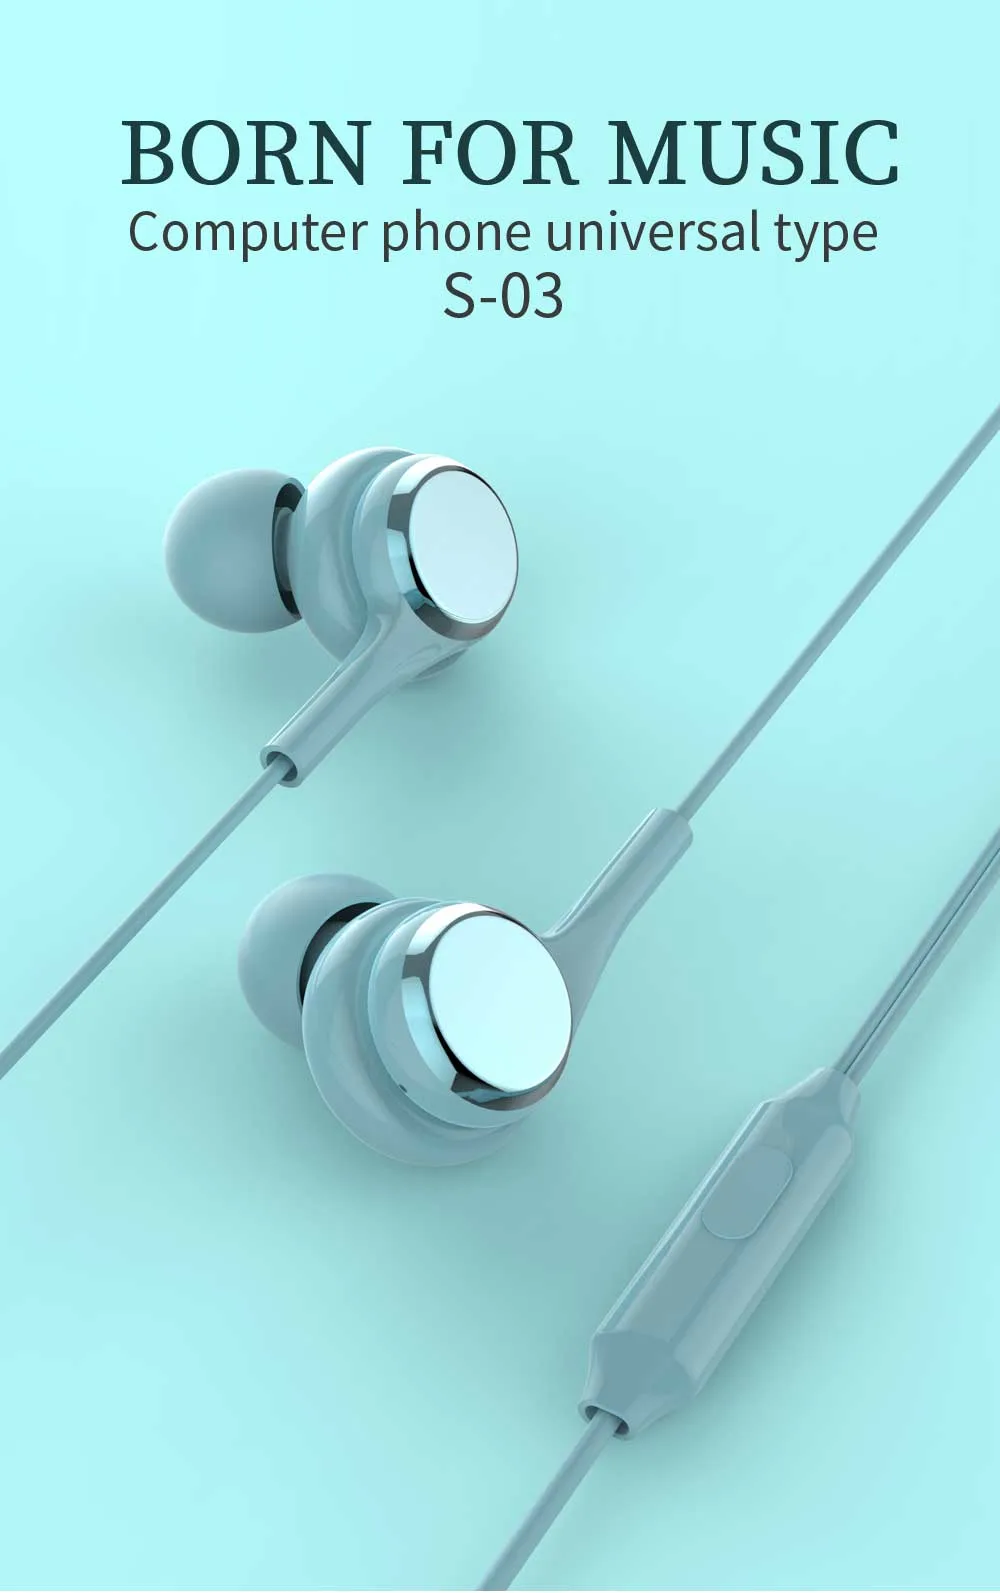 Super Bass 3.5mm Earbud with Microphone for iPhone and Android